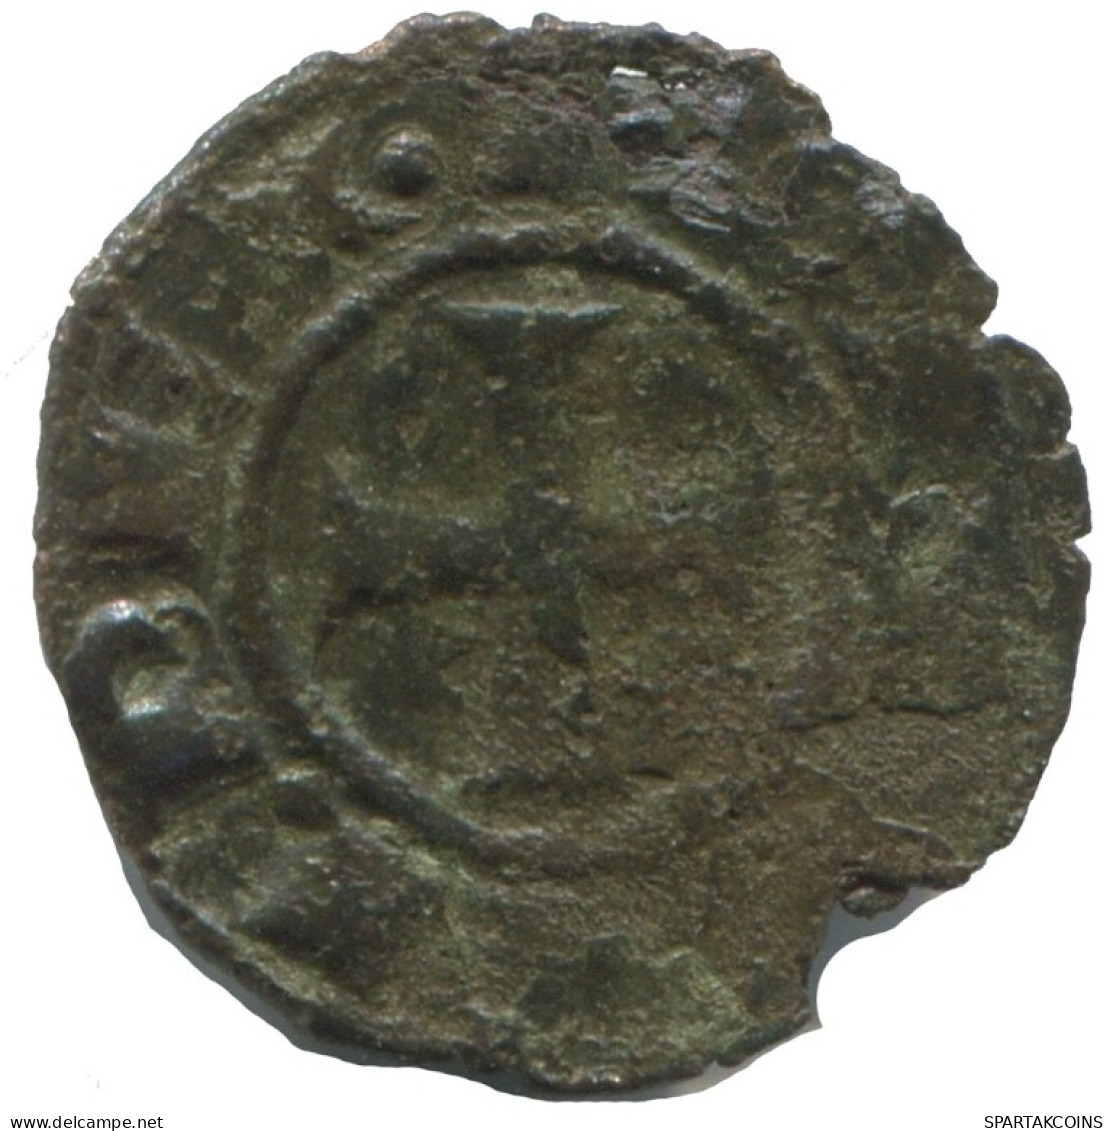 CRUSADER CROSS Authentic Original MEDIEVAL EUROPEAN Coin 1.1g/15mm #AC290.8.E.A - Andere - Europa